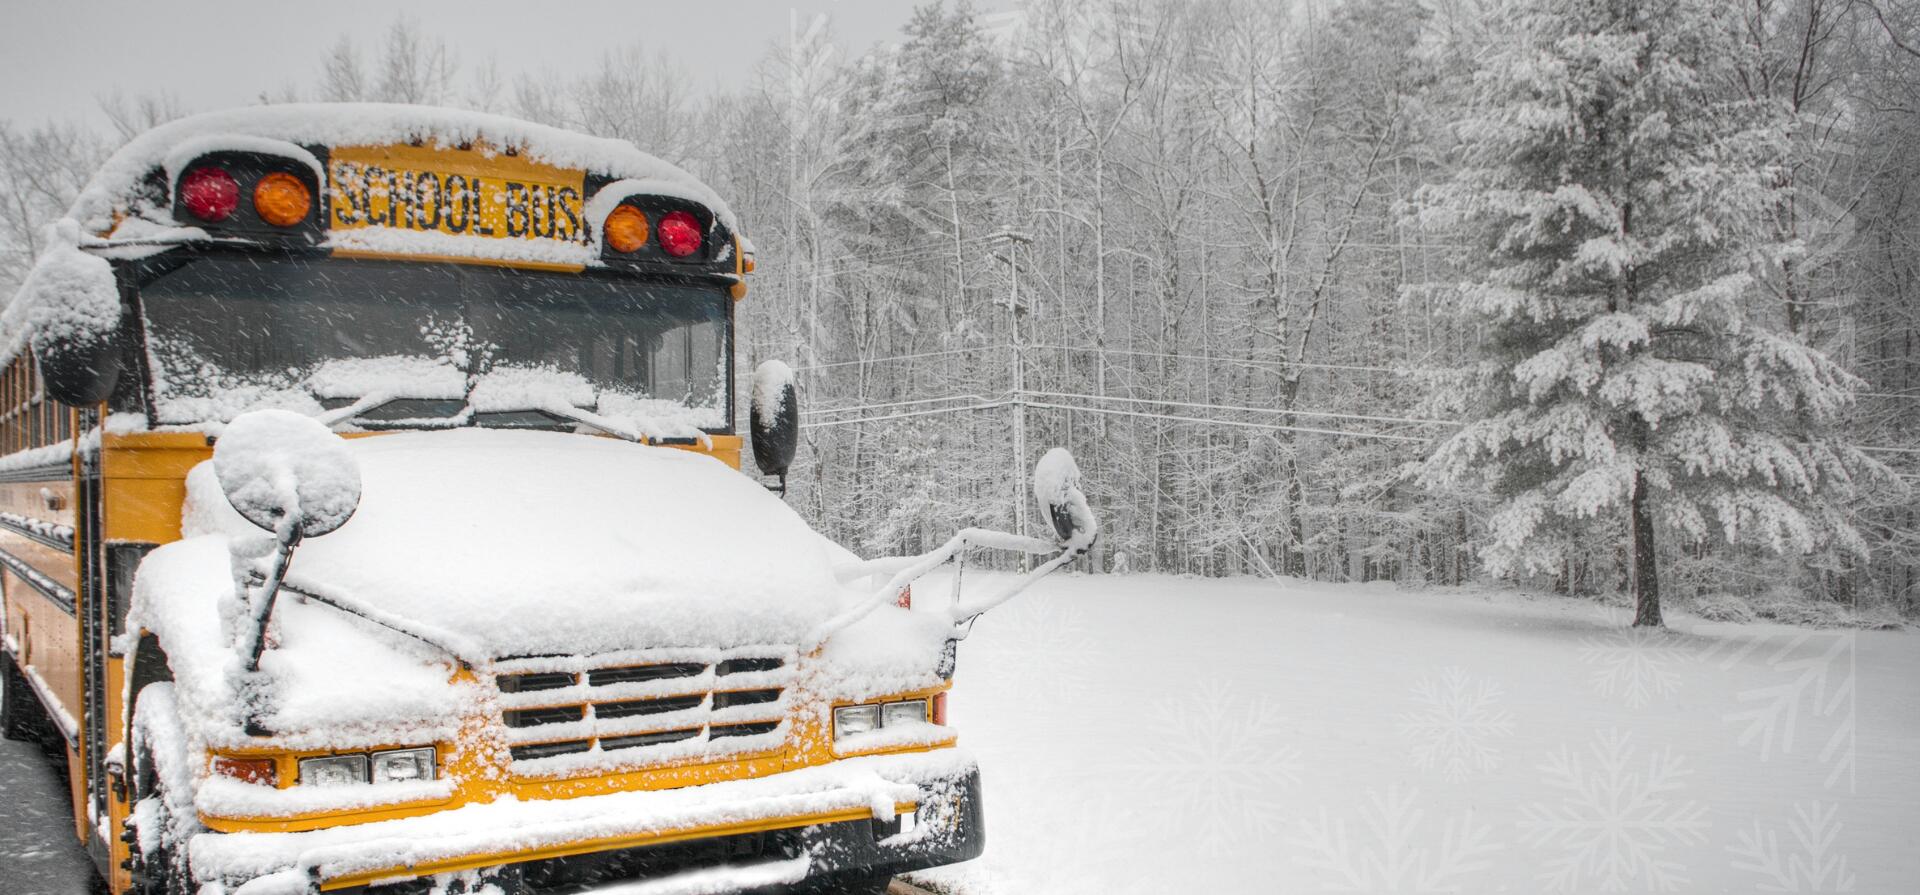 School delays and closures due to winter weather